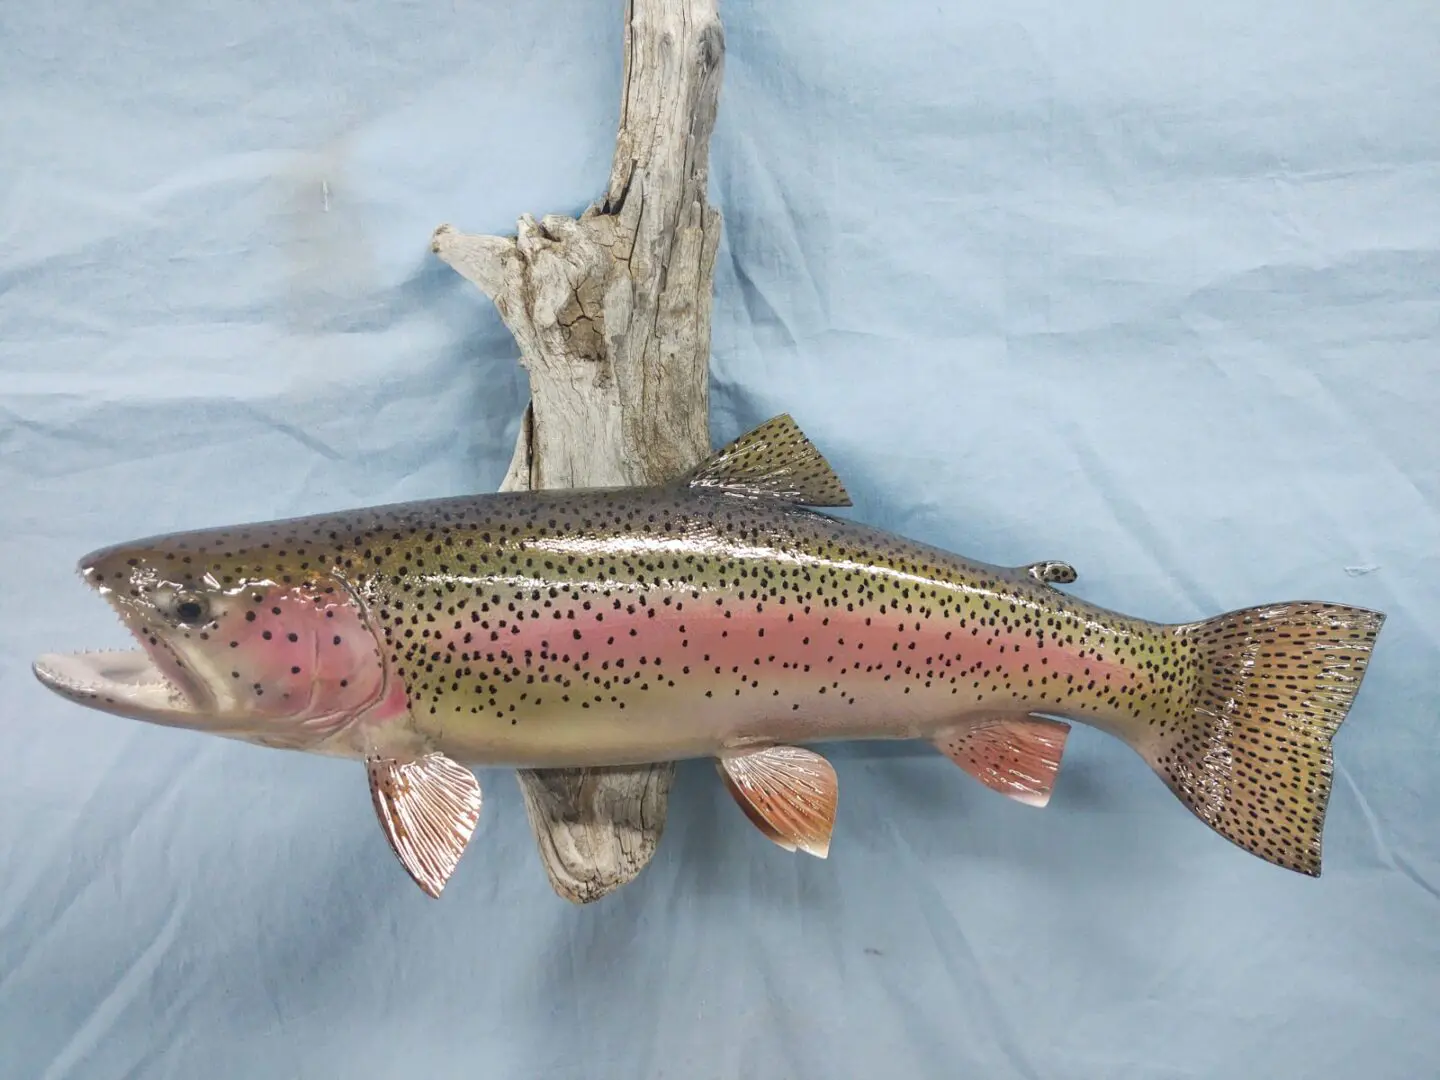 Light pink colored scales on this fish taxidermy